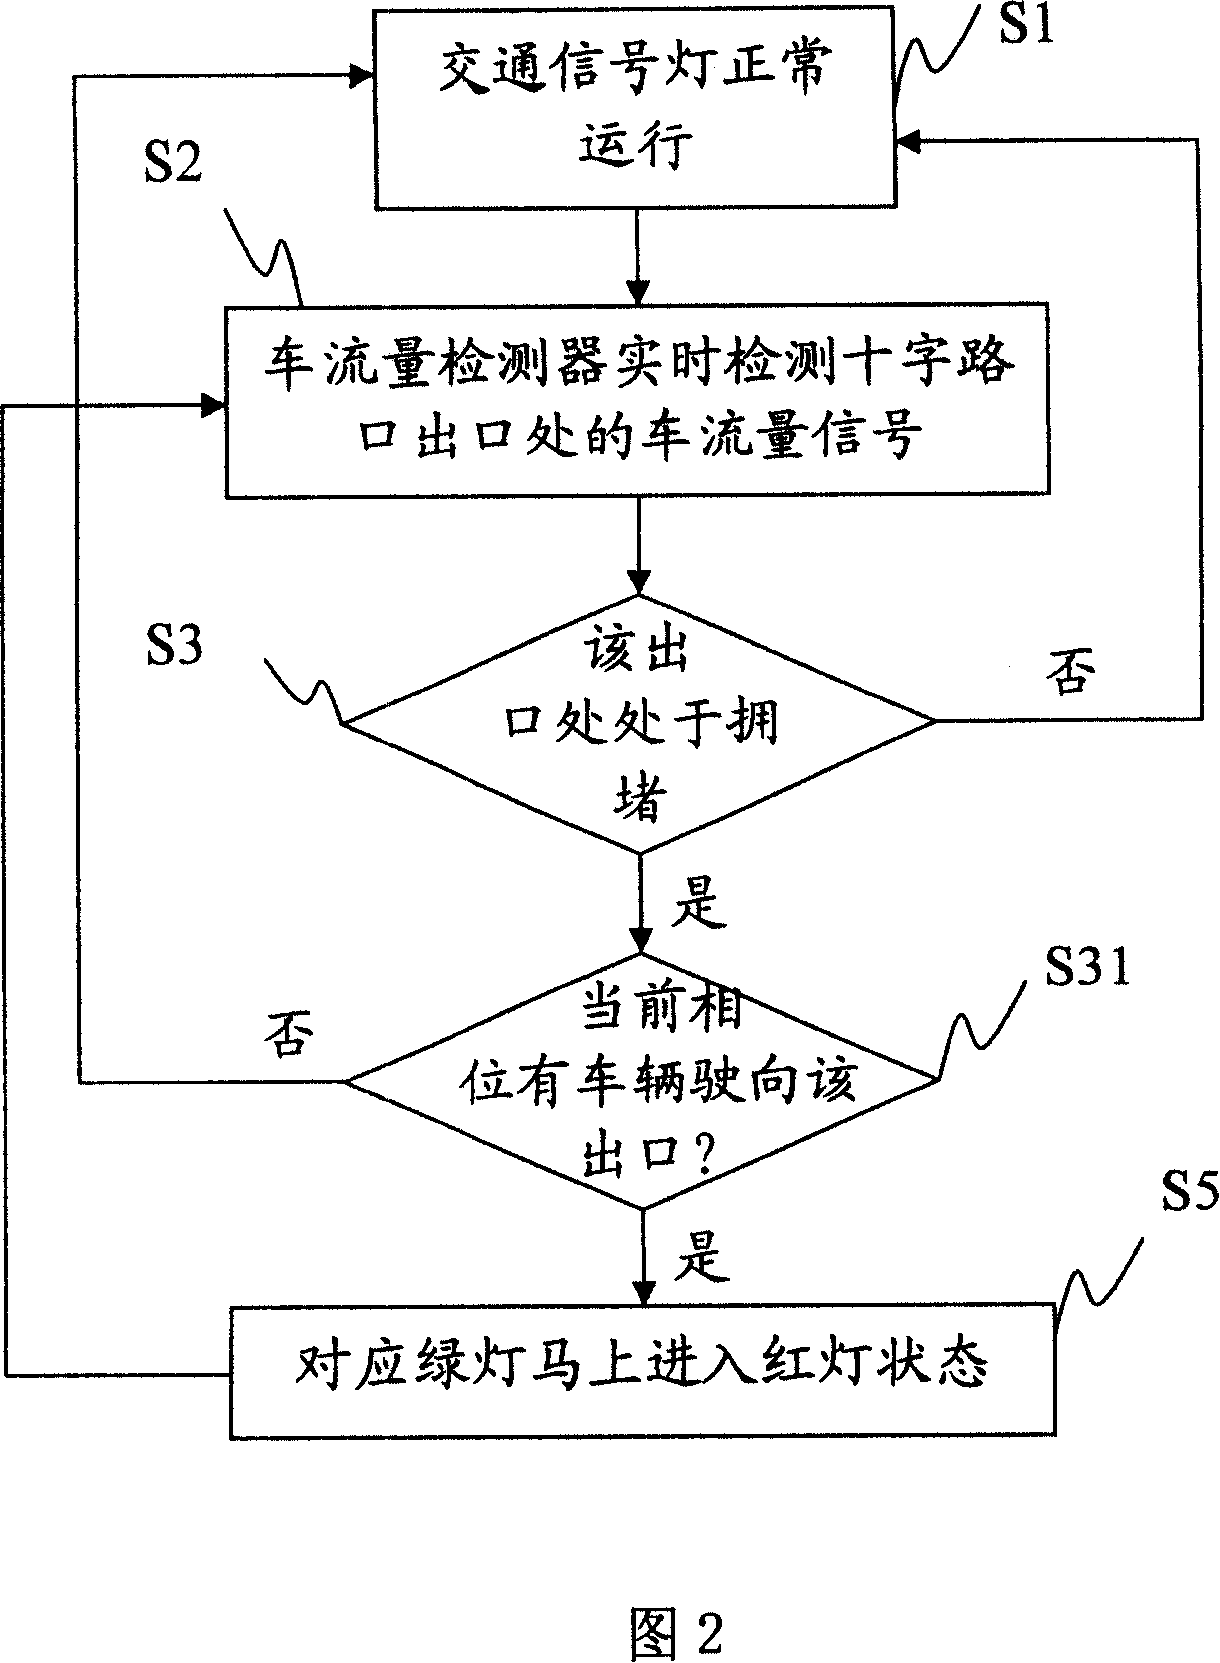 A traffic signal lamp control method and traffic signal lamp system